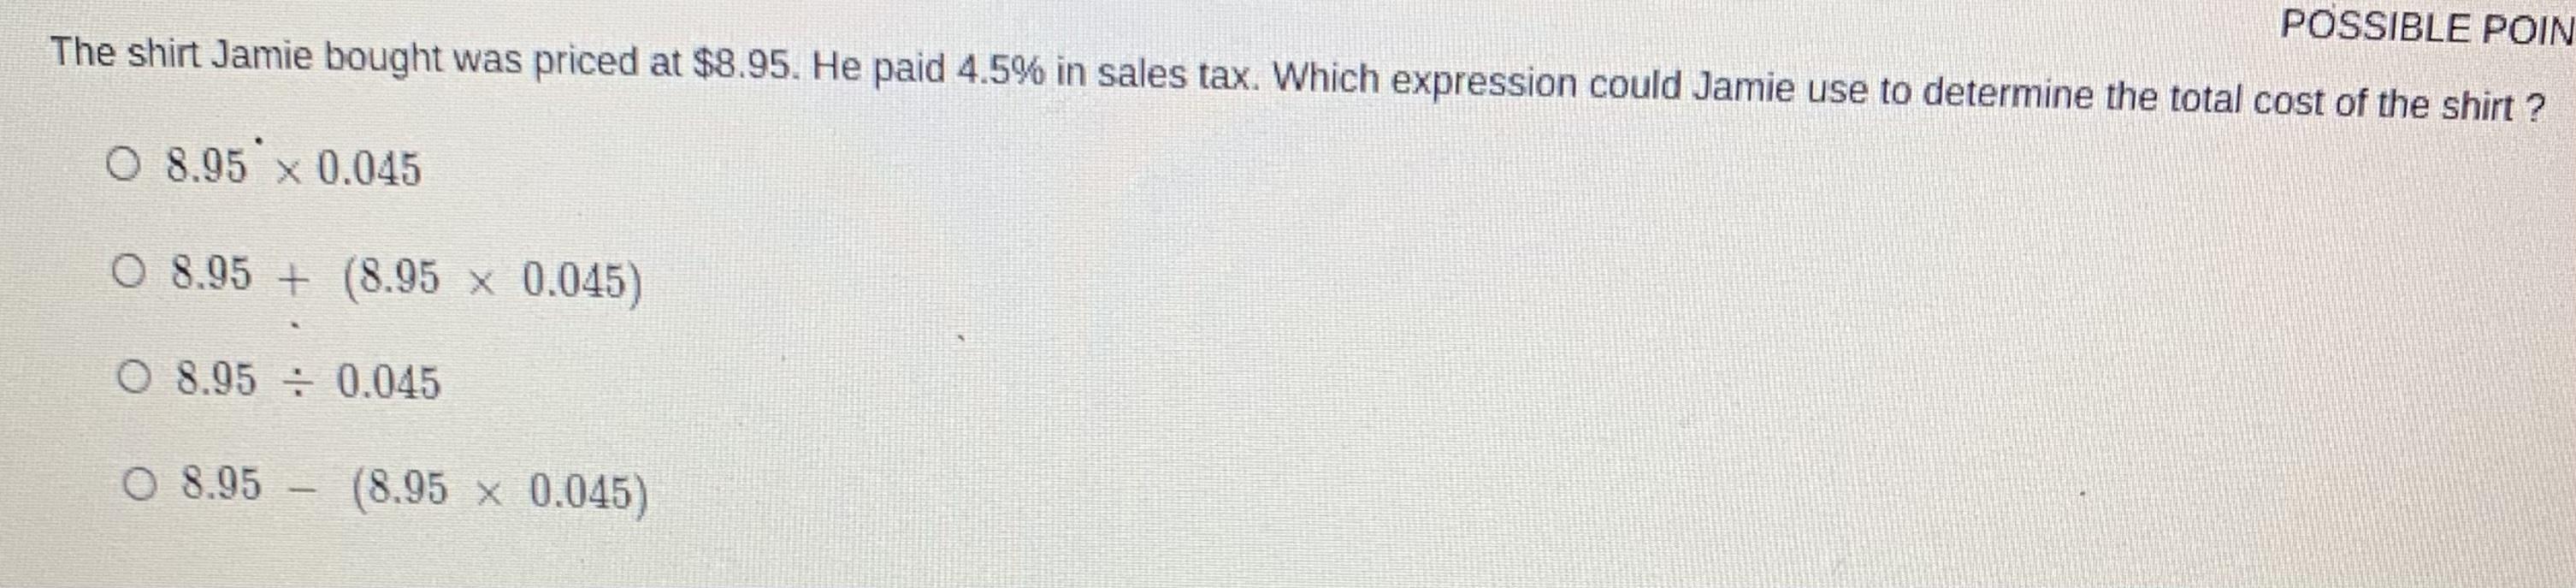 Please Help Me With This Math Problem. Brainlist To The Brainiest Answer!-Reporting Answers That Dont